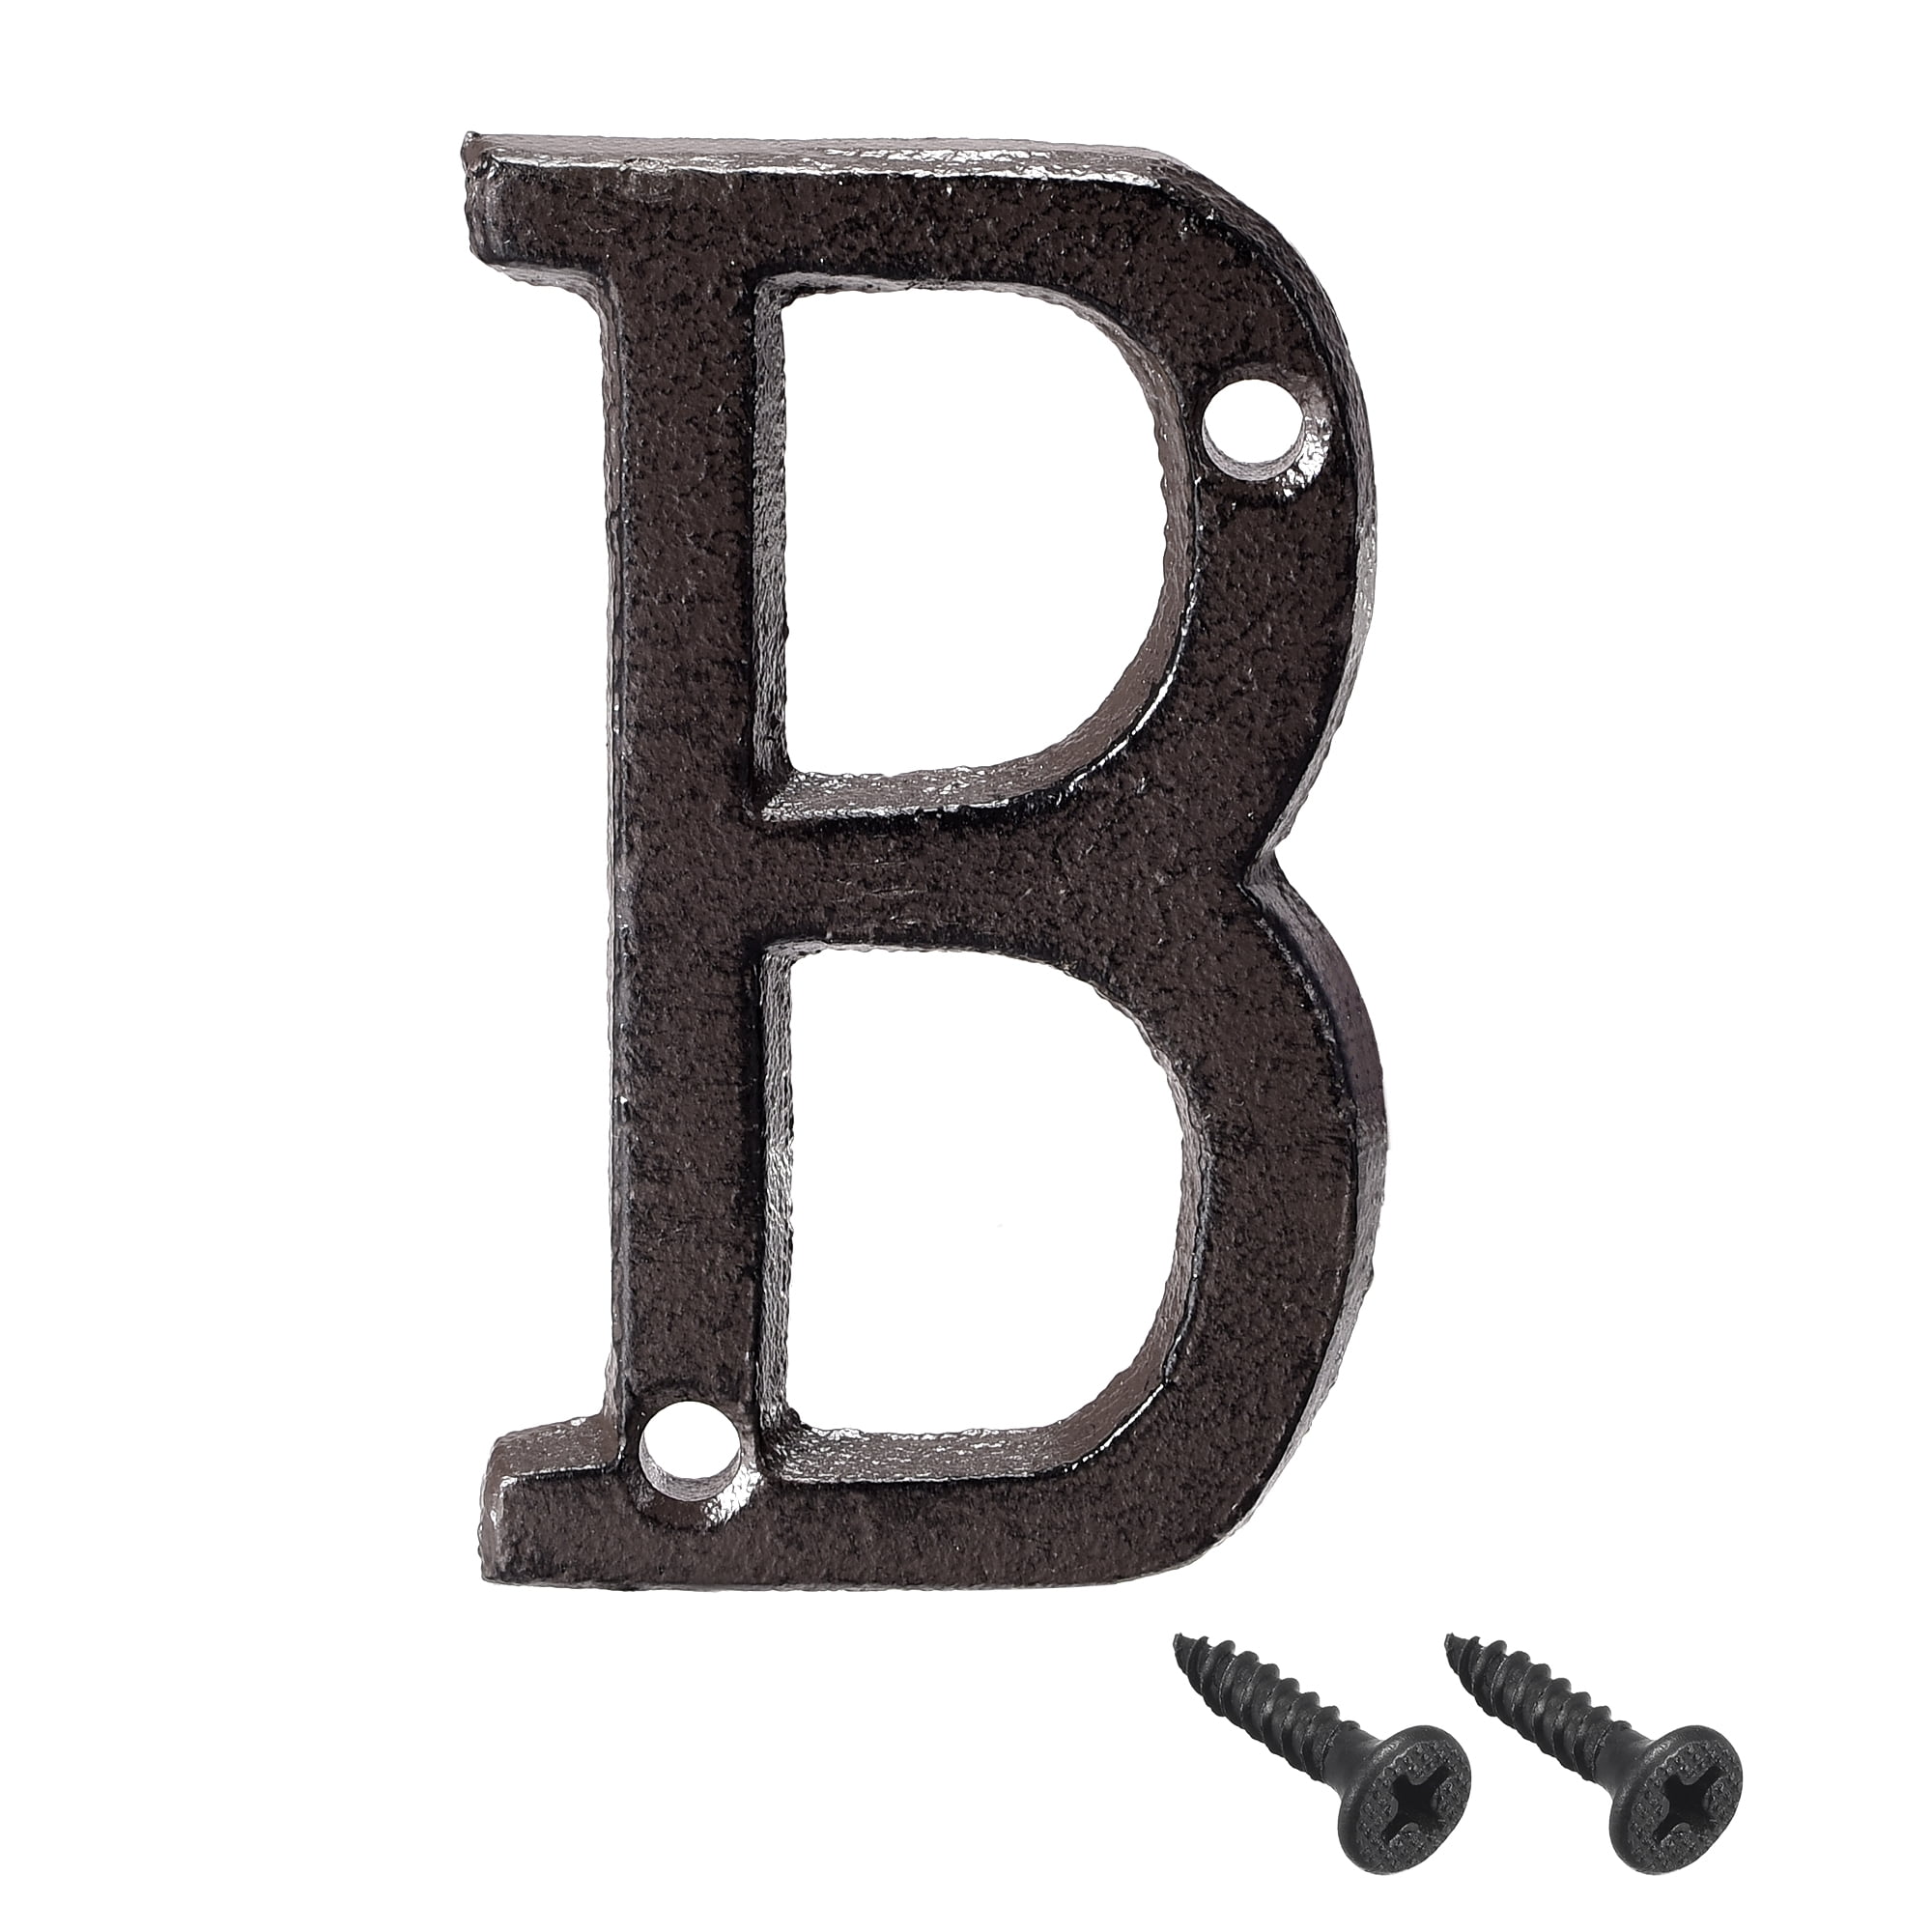 3-Inch Cast Iron Letters for Wall and Mailbox - Letter L - Industrial  Design Mailbox Letters for Address Sign and House Decor - Black Brown